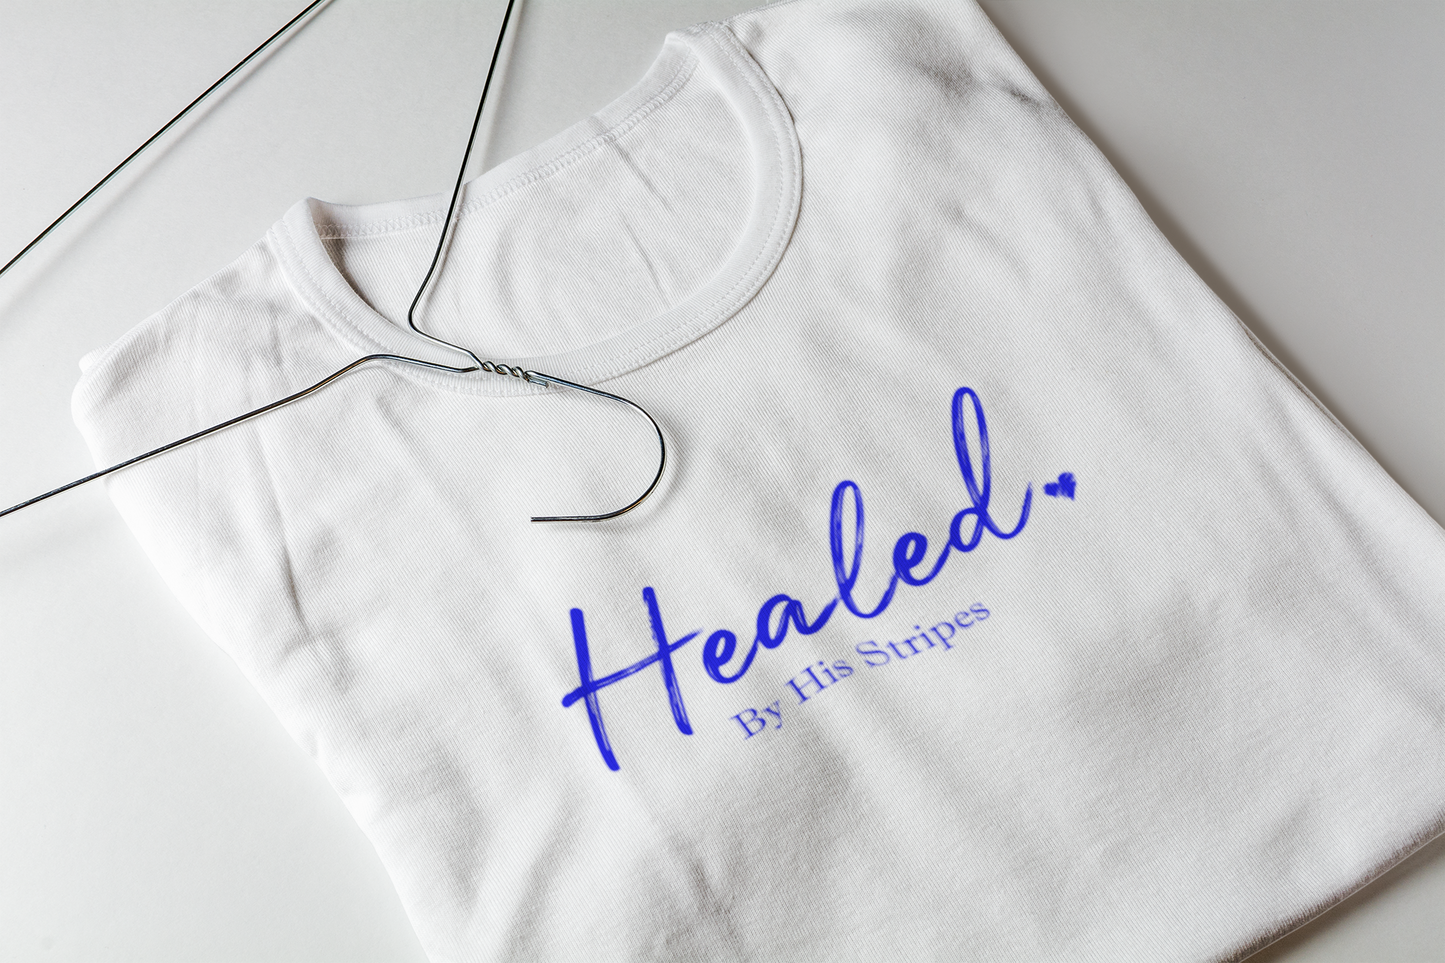 Healed By His Stripes (white/electric blue)